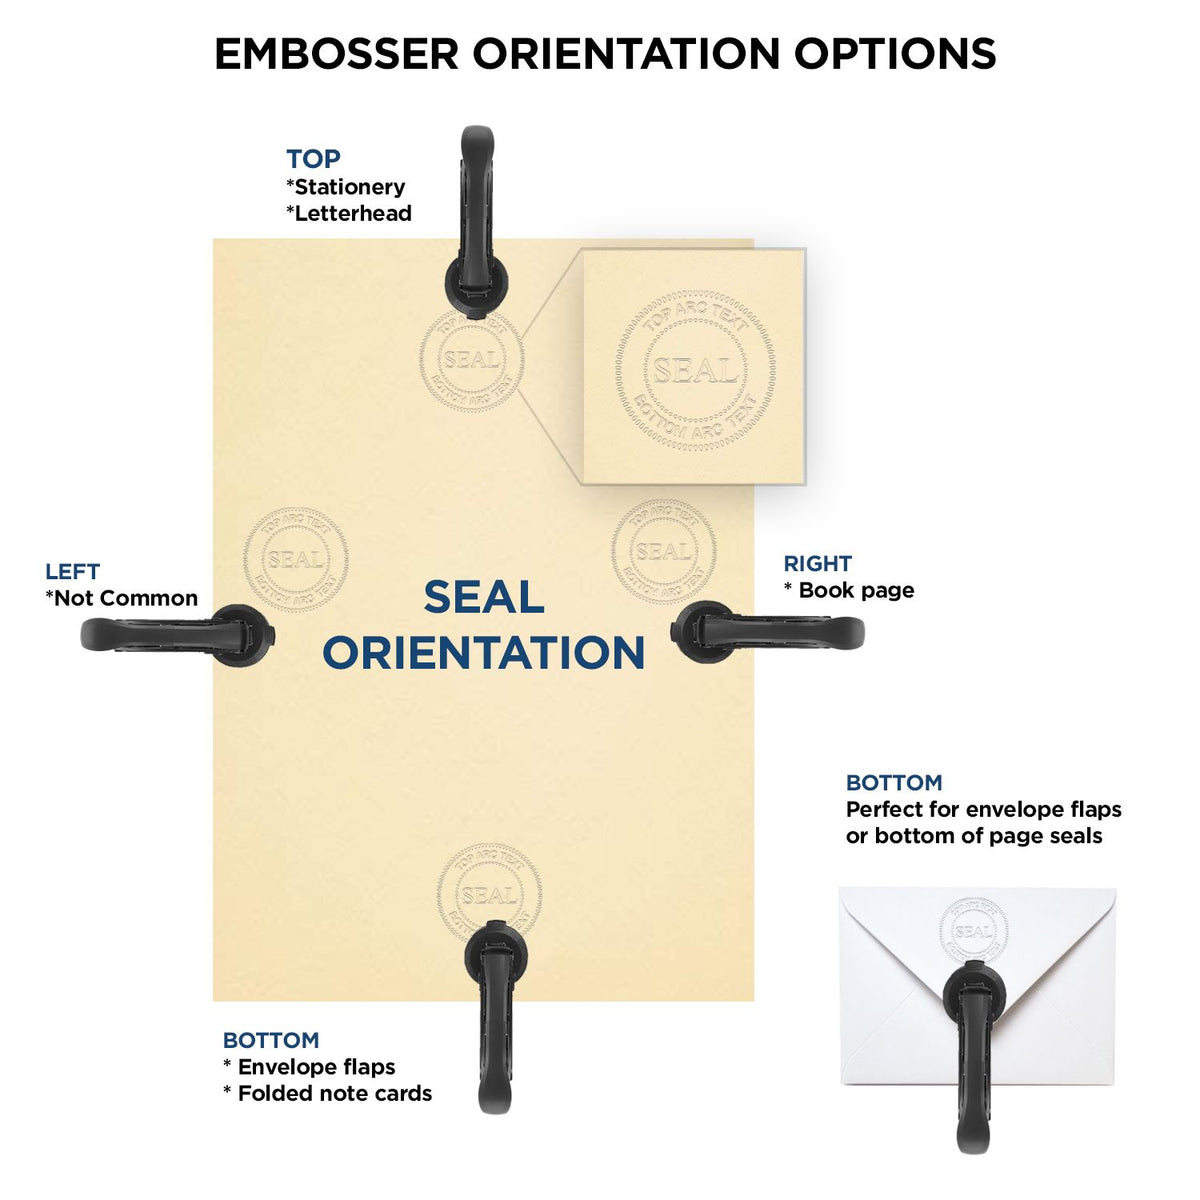 An infographic for the Gift Mississippi Engineer Seal showing embosser orientation, this is showing examples of a top, bottom, right and left insert.